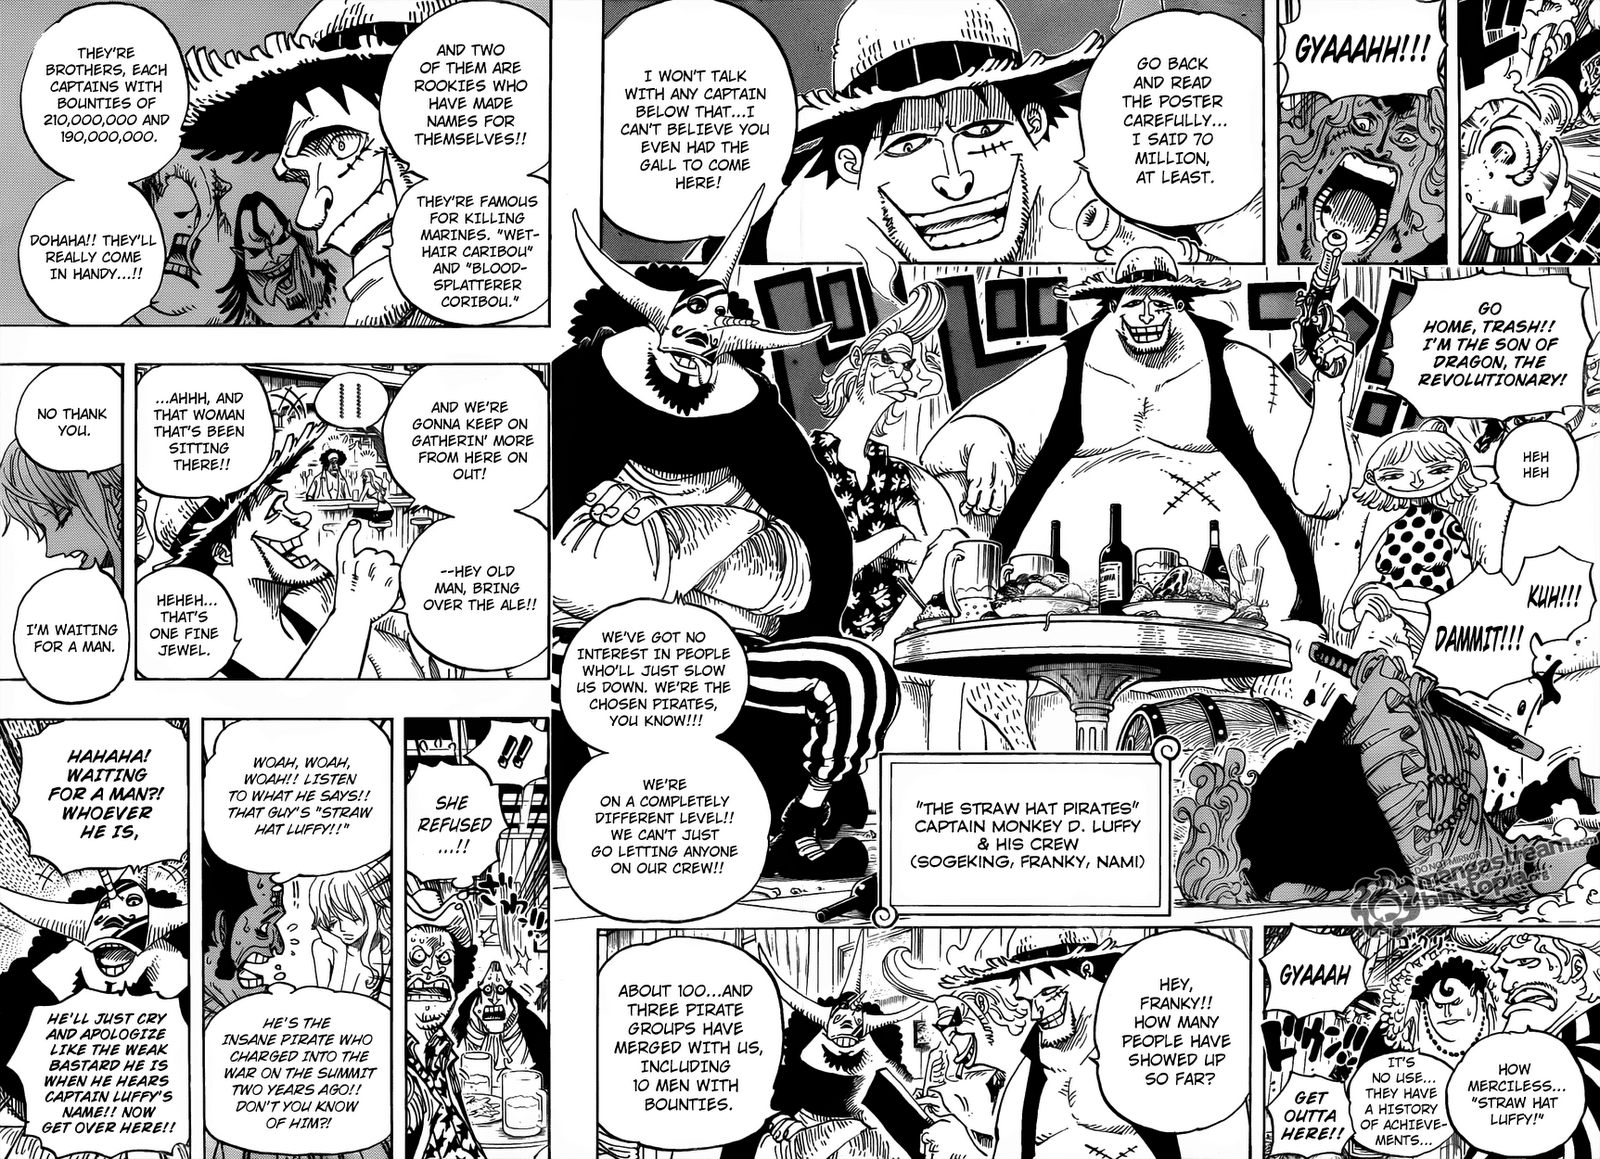 Read One Piece 598 Online | 09 - Press F5 to reload this image